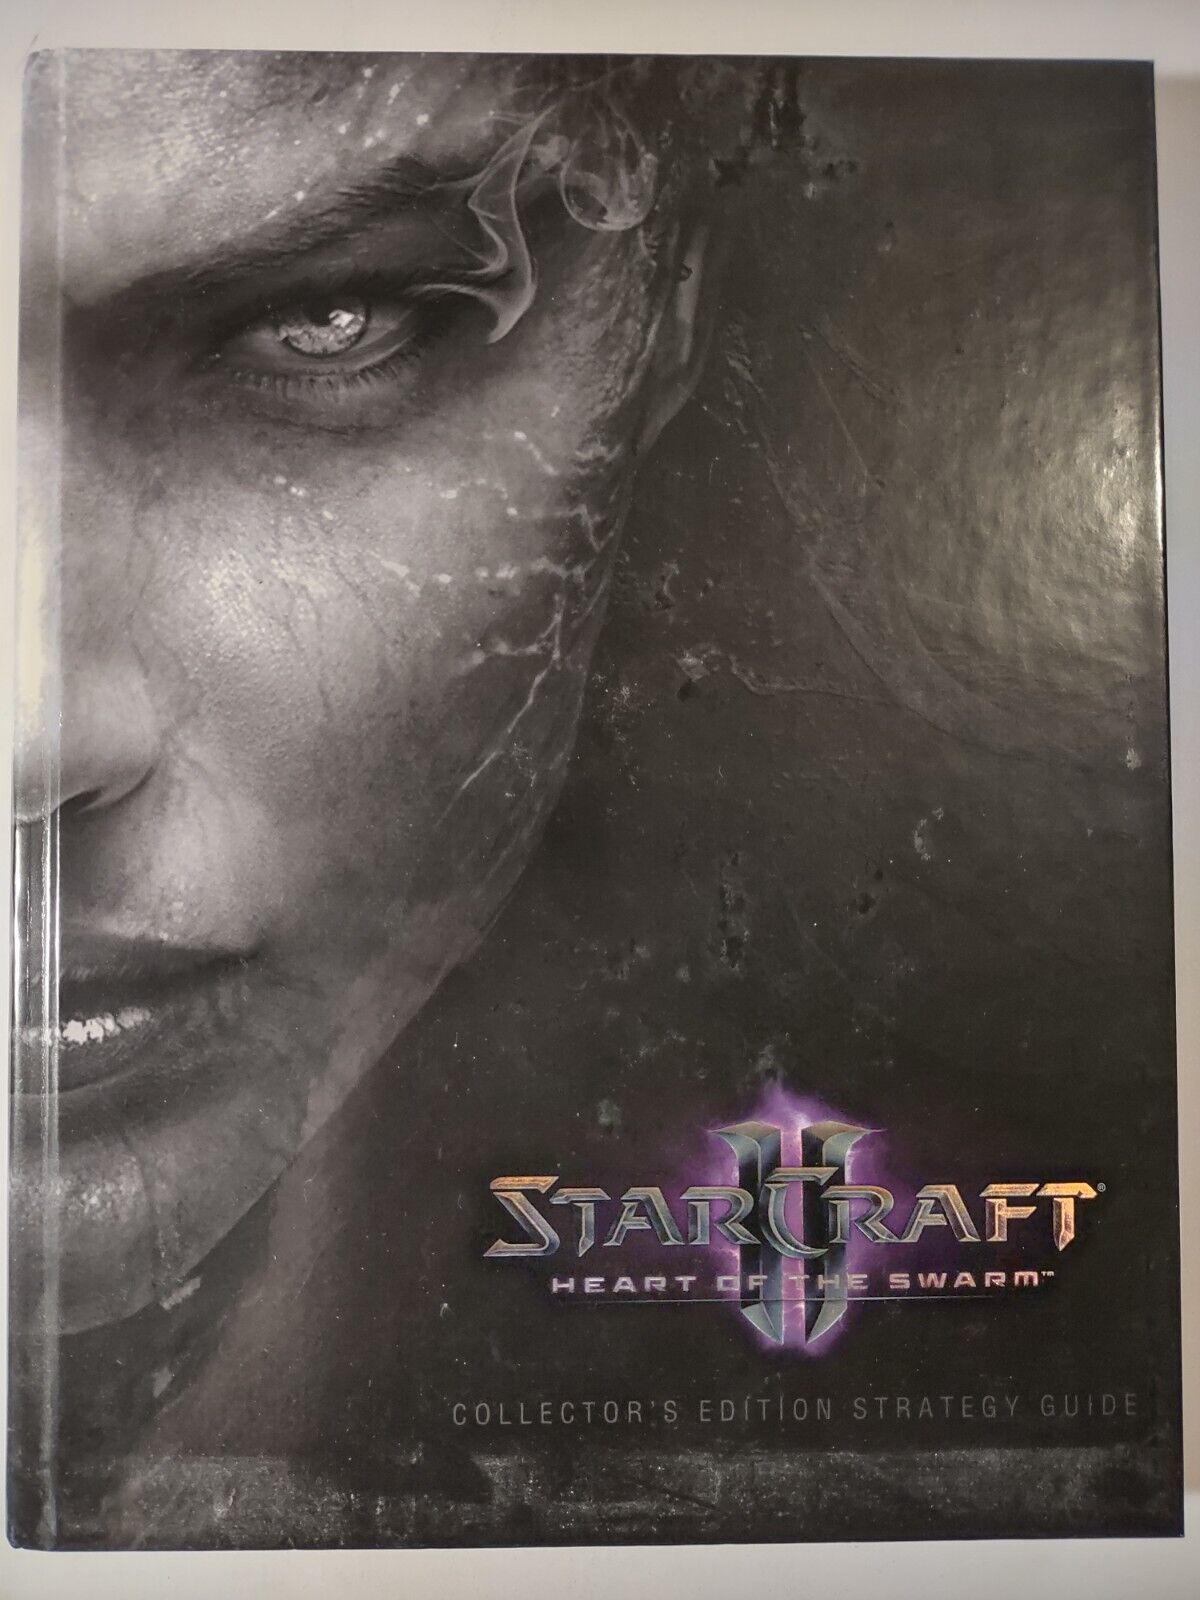 StarCraft II: Heart of the Swarm Collector’s Edition Strategy Guide